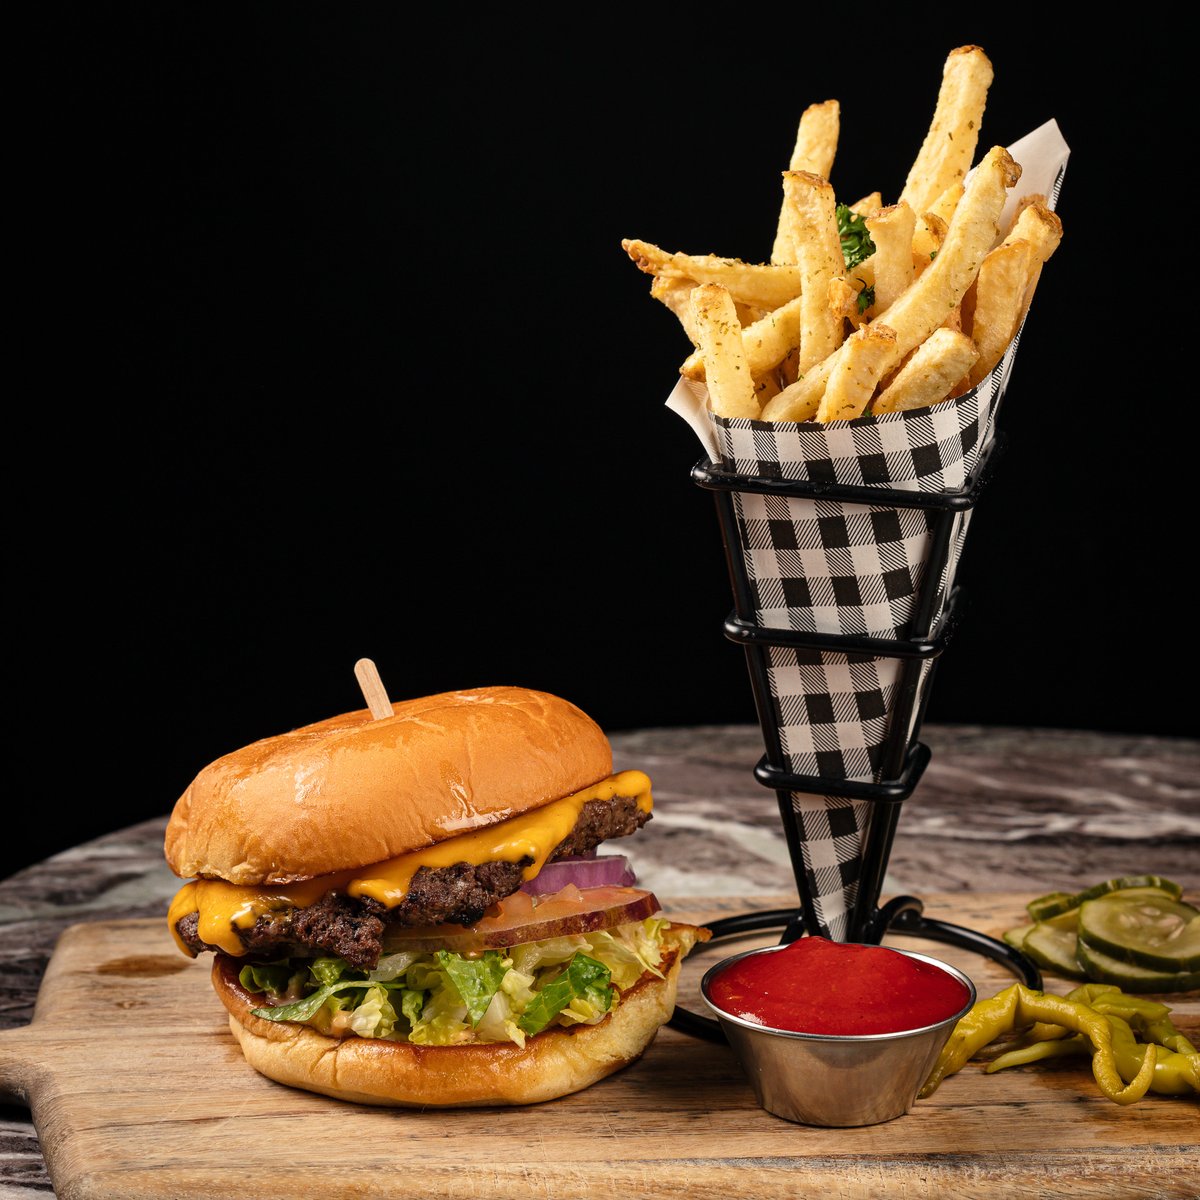 Today's delicious dilemma: keep smashing on the ping pong table or dive into a burger bliss? We say BOTH! #wearespin